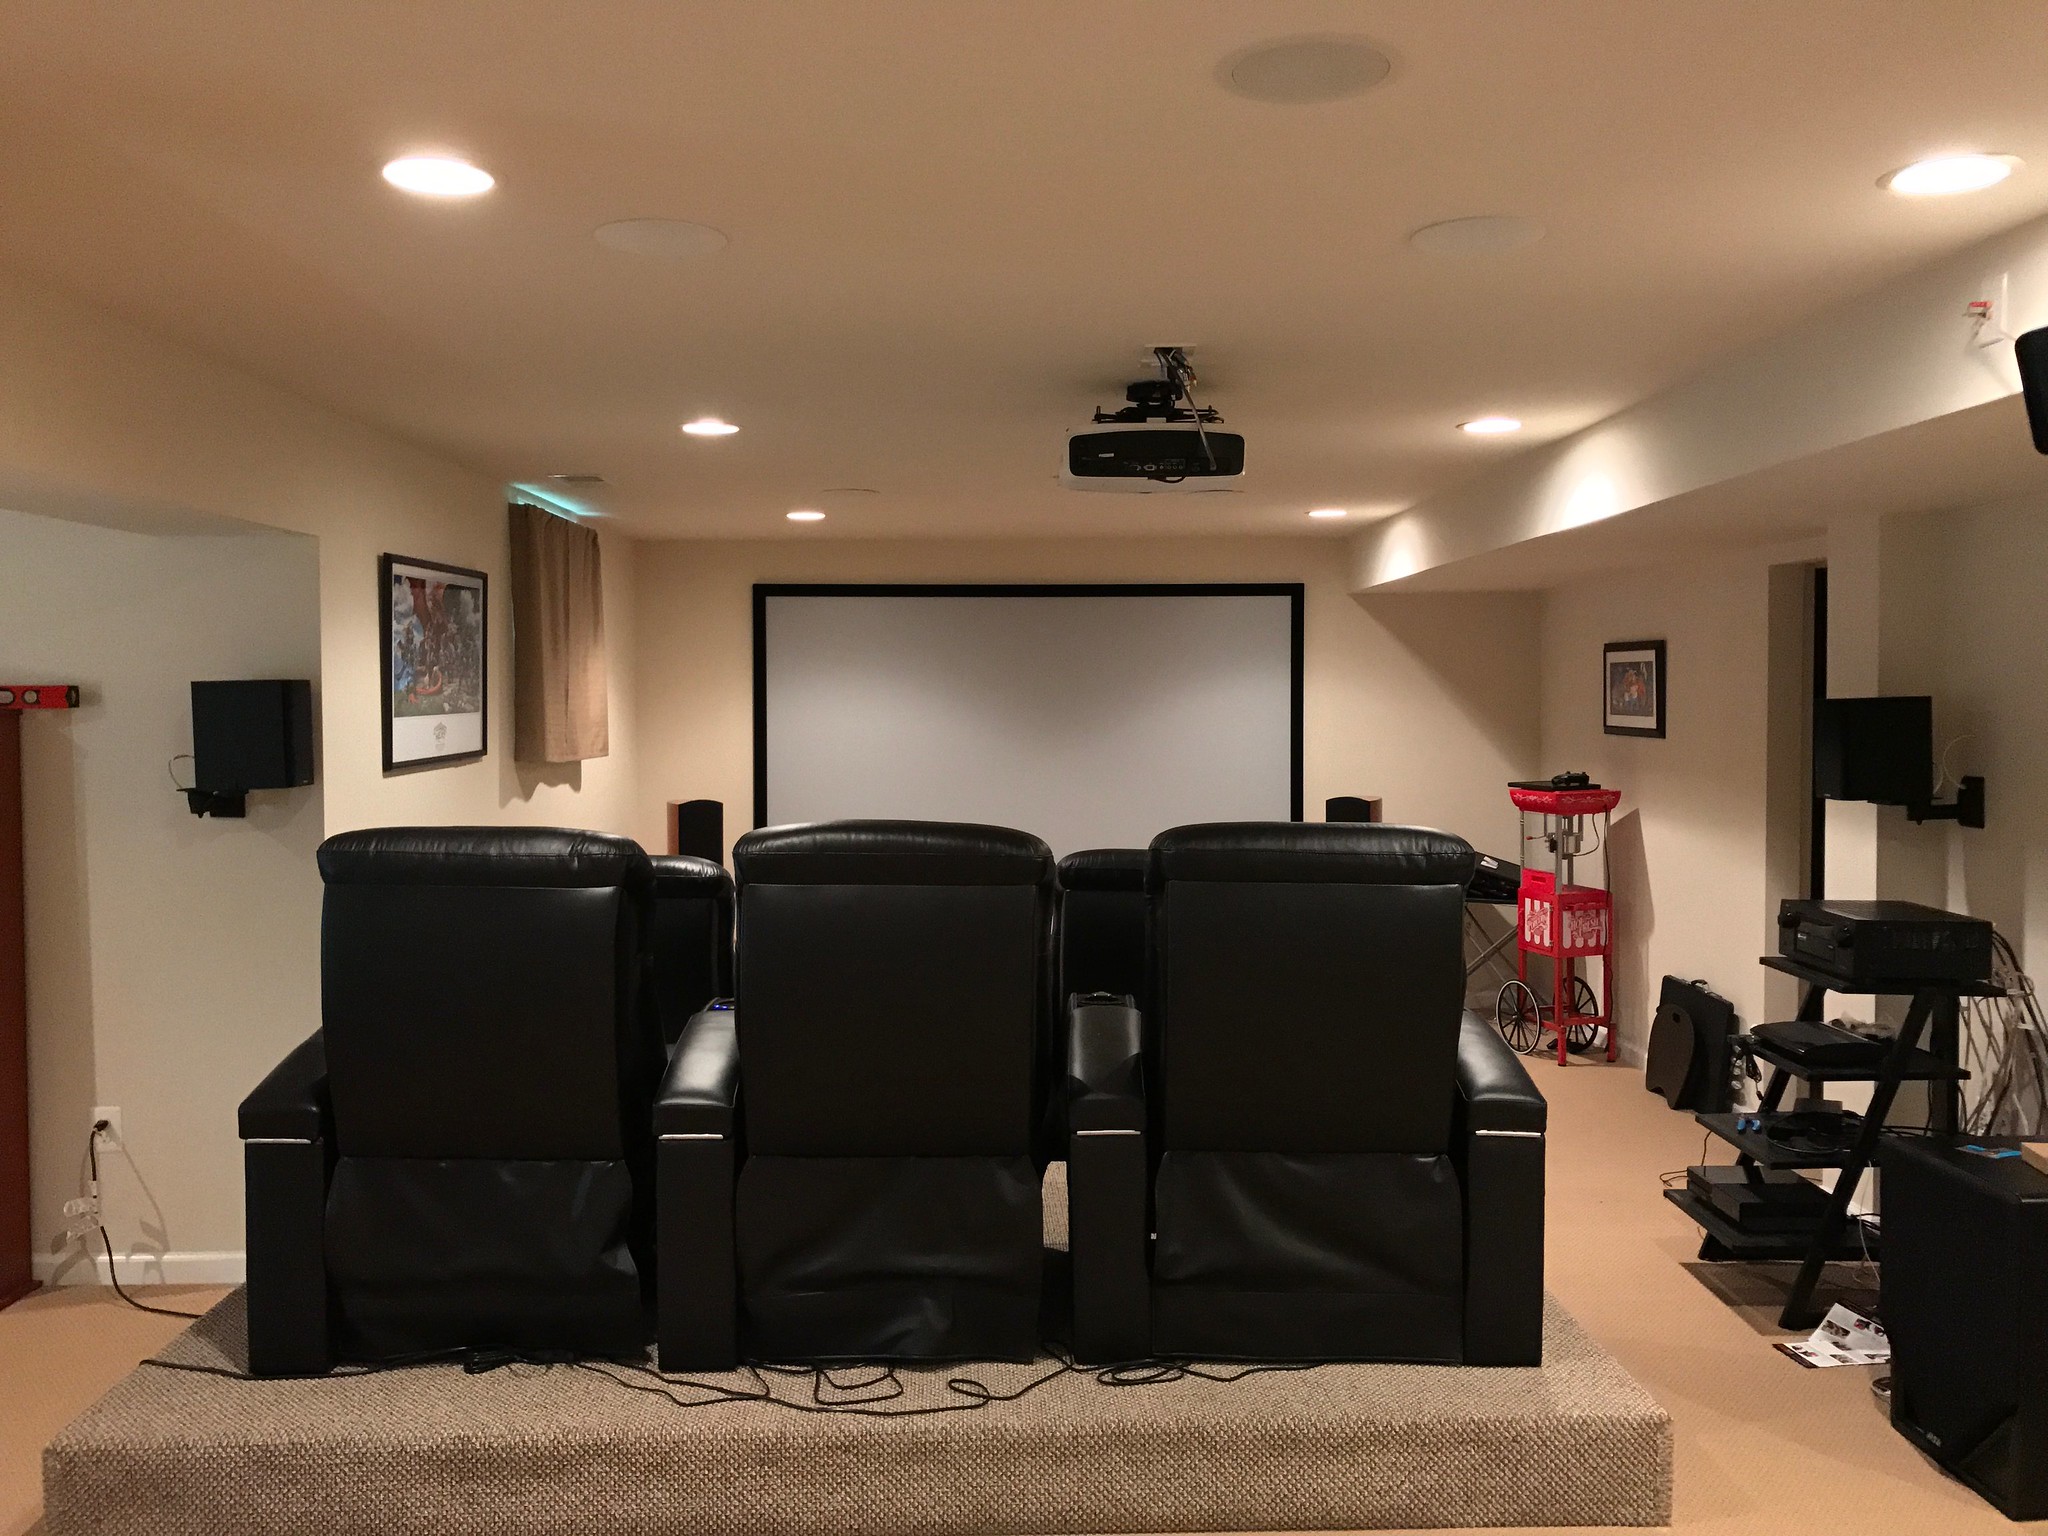 Dolby Atmos 7.1.4 (7.2.4) Setup  Home theater decor, Small home theaters, Home  theater design